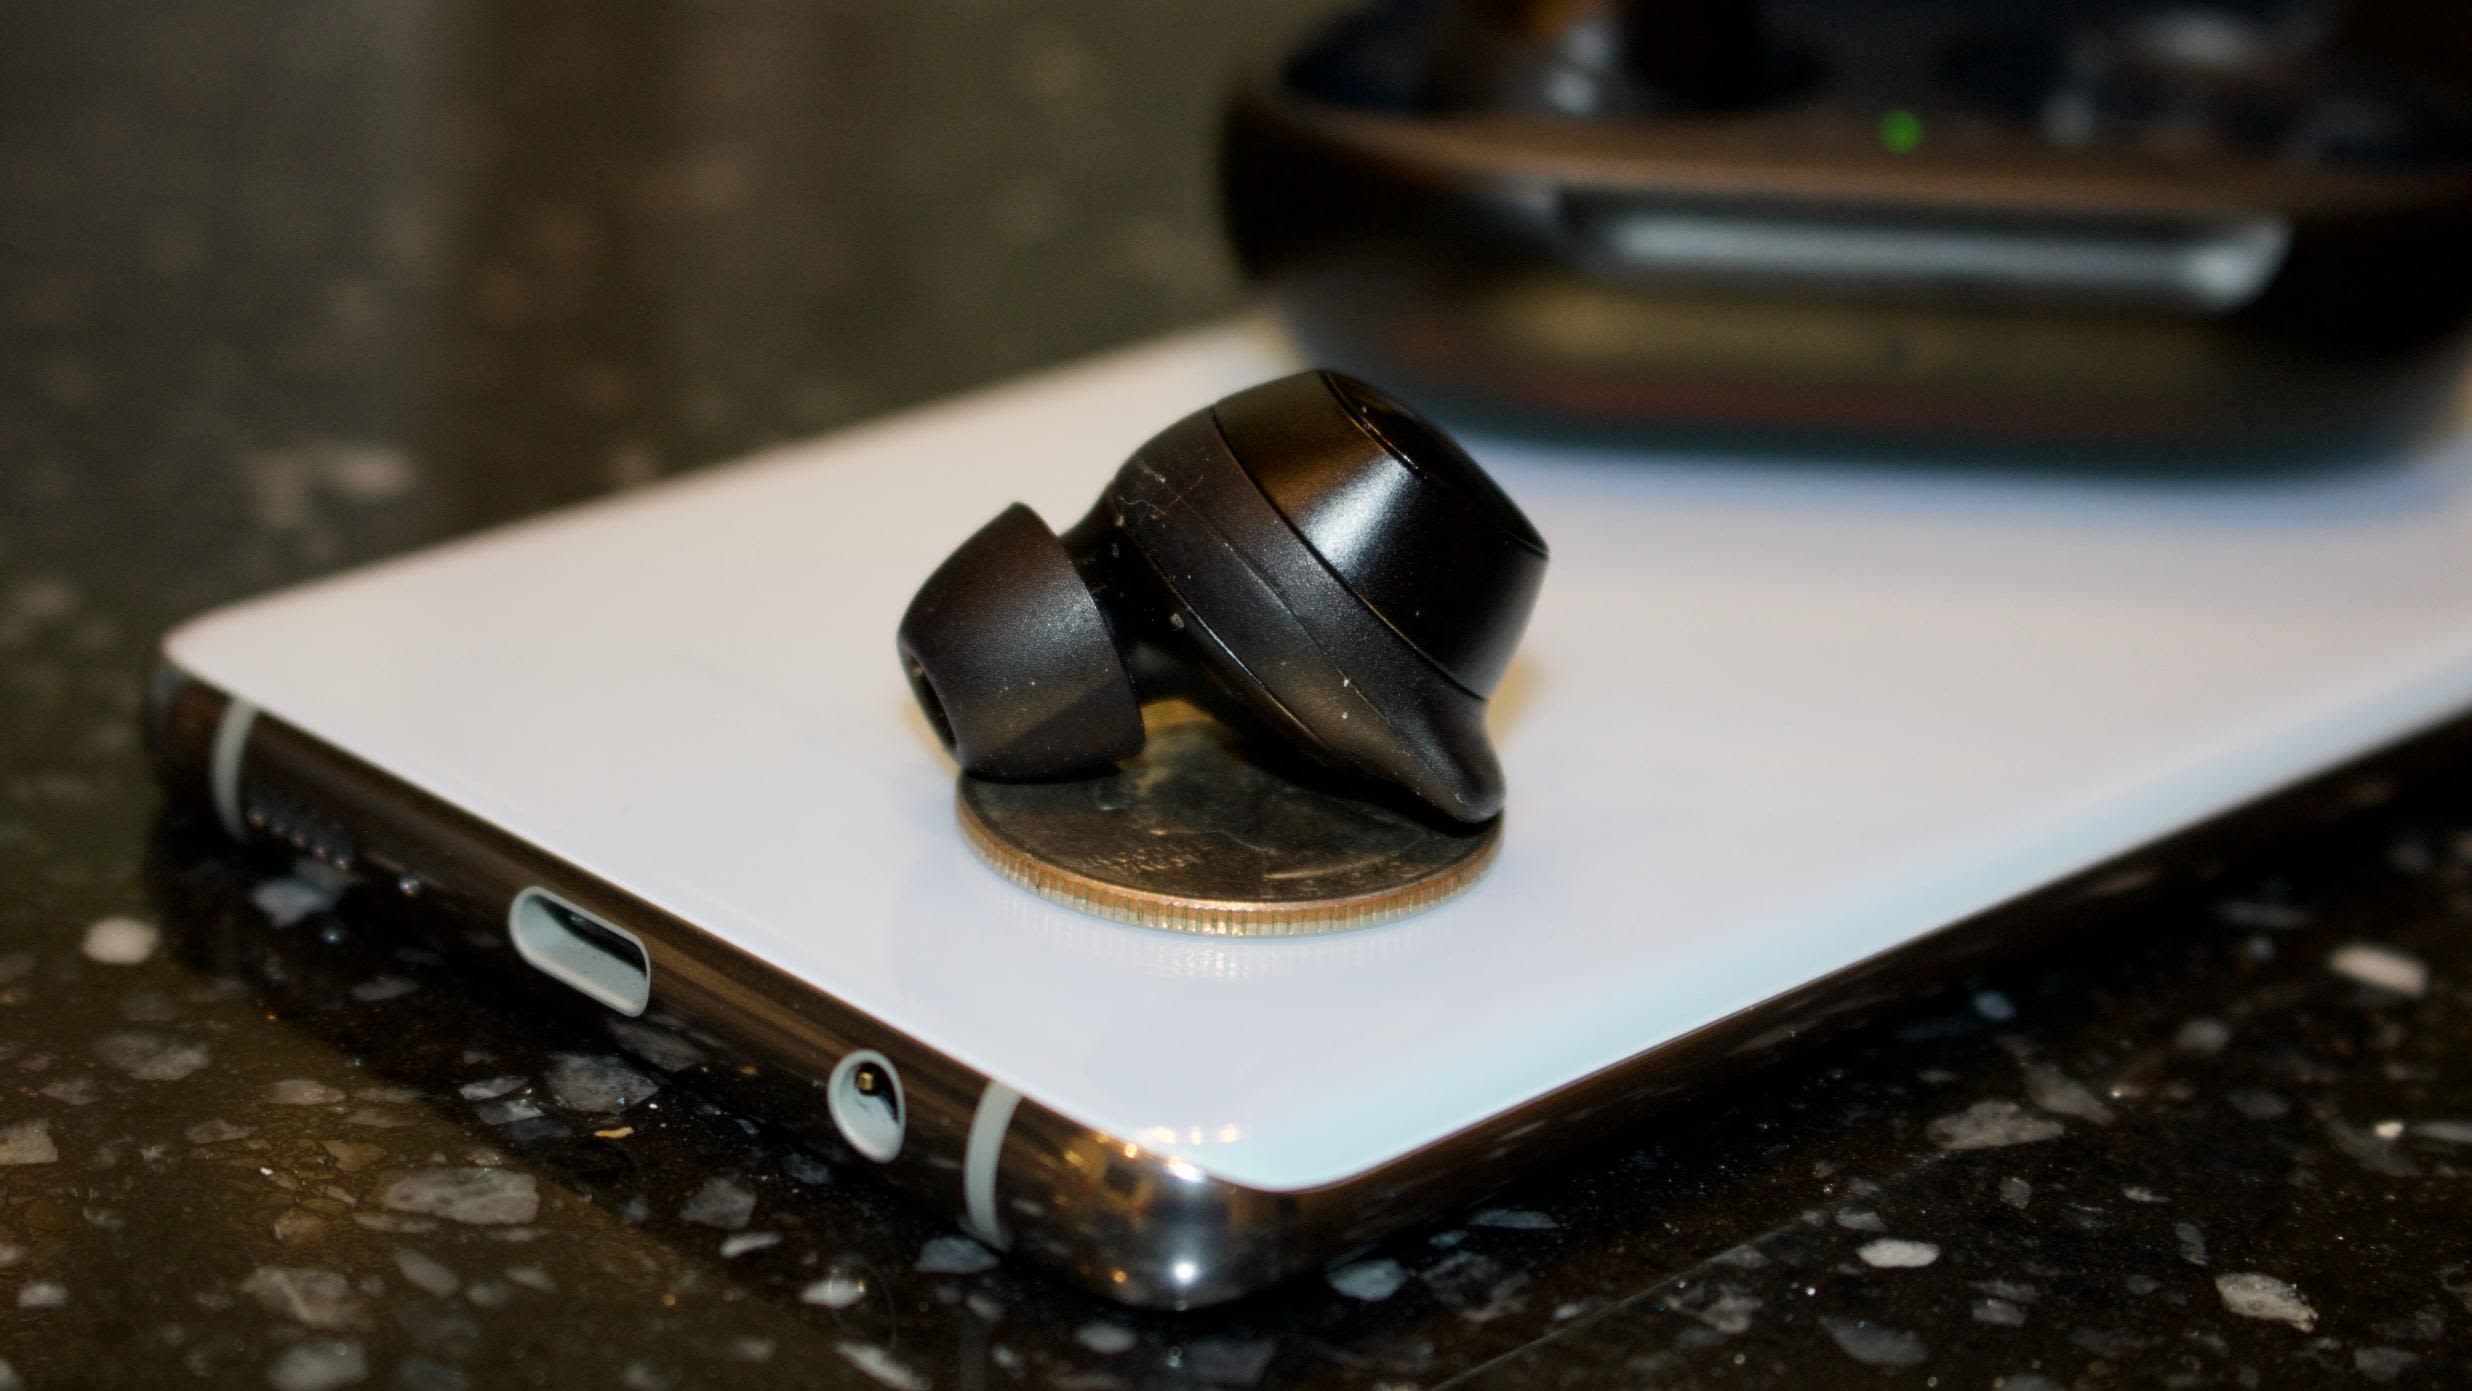 Samsung Galaxy Buds Review: AirPods Lessons Learned - SlashGear